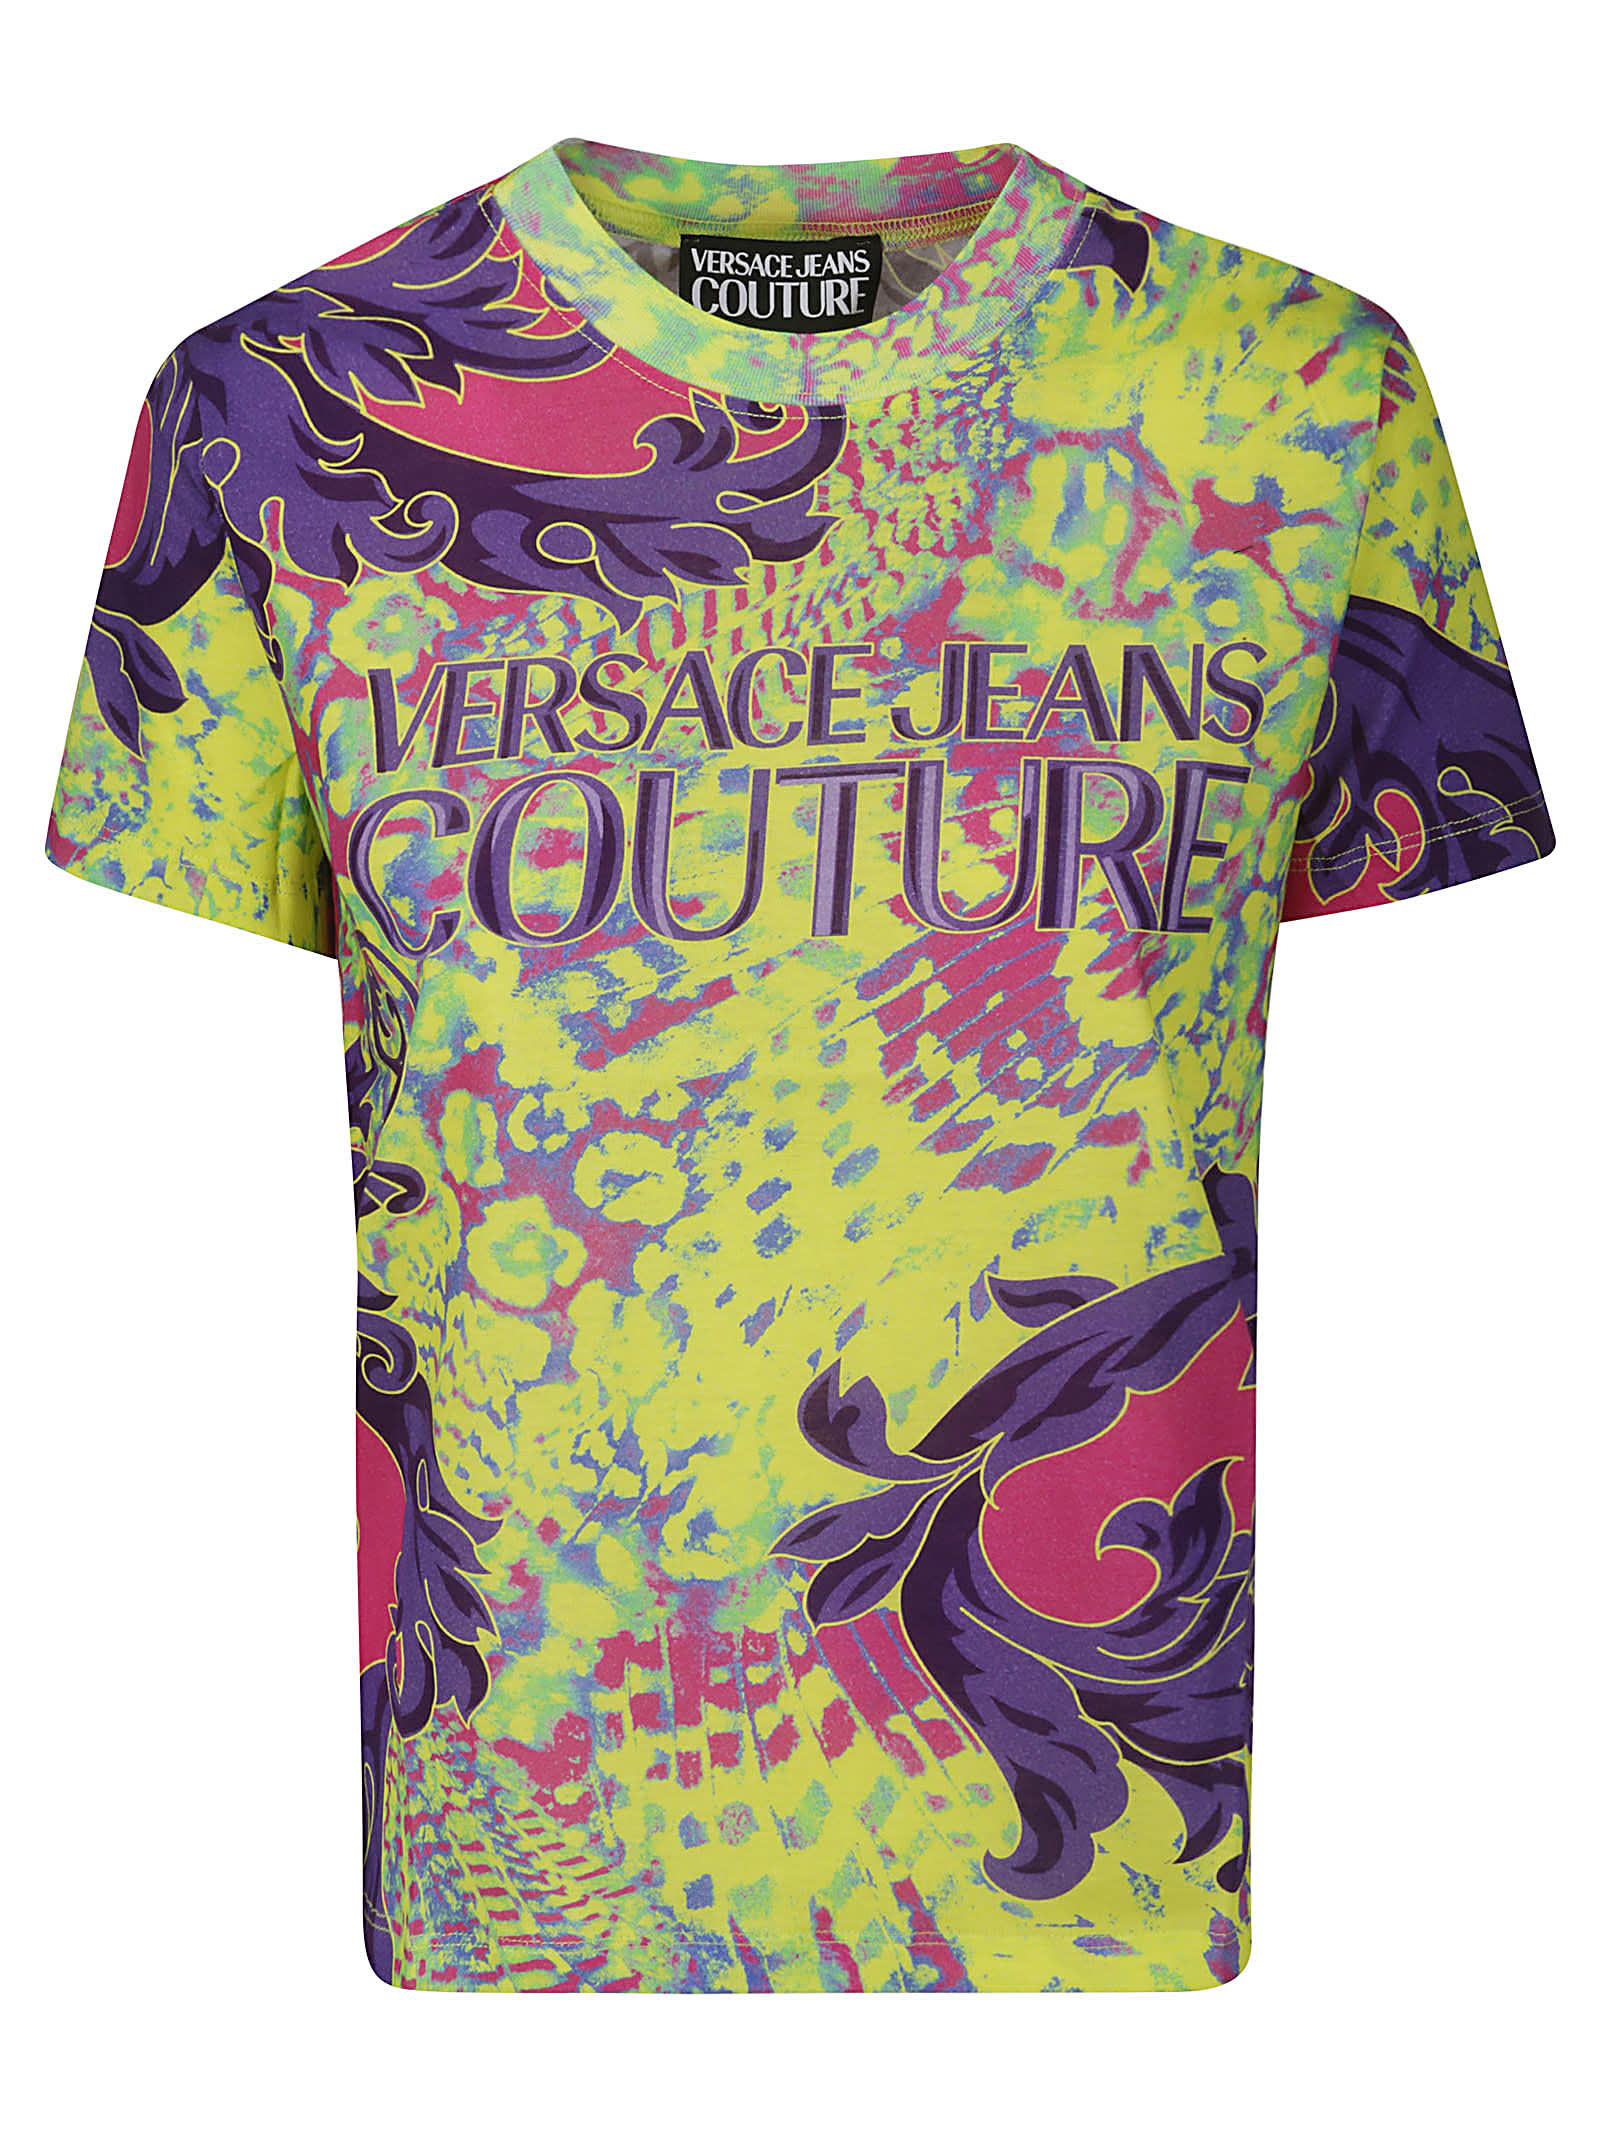 VERSACE JEANS COUTURE 76DP613 R PLACED T-SHIRT